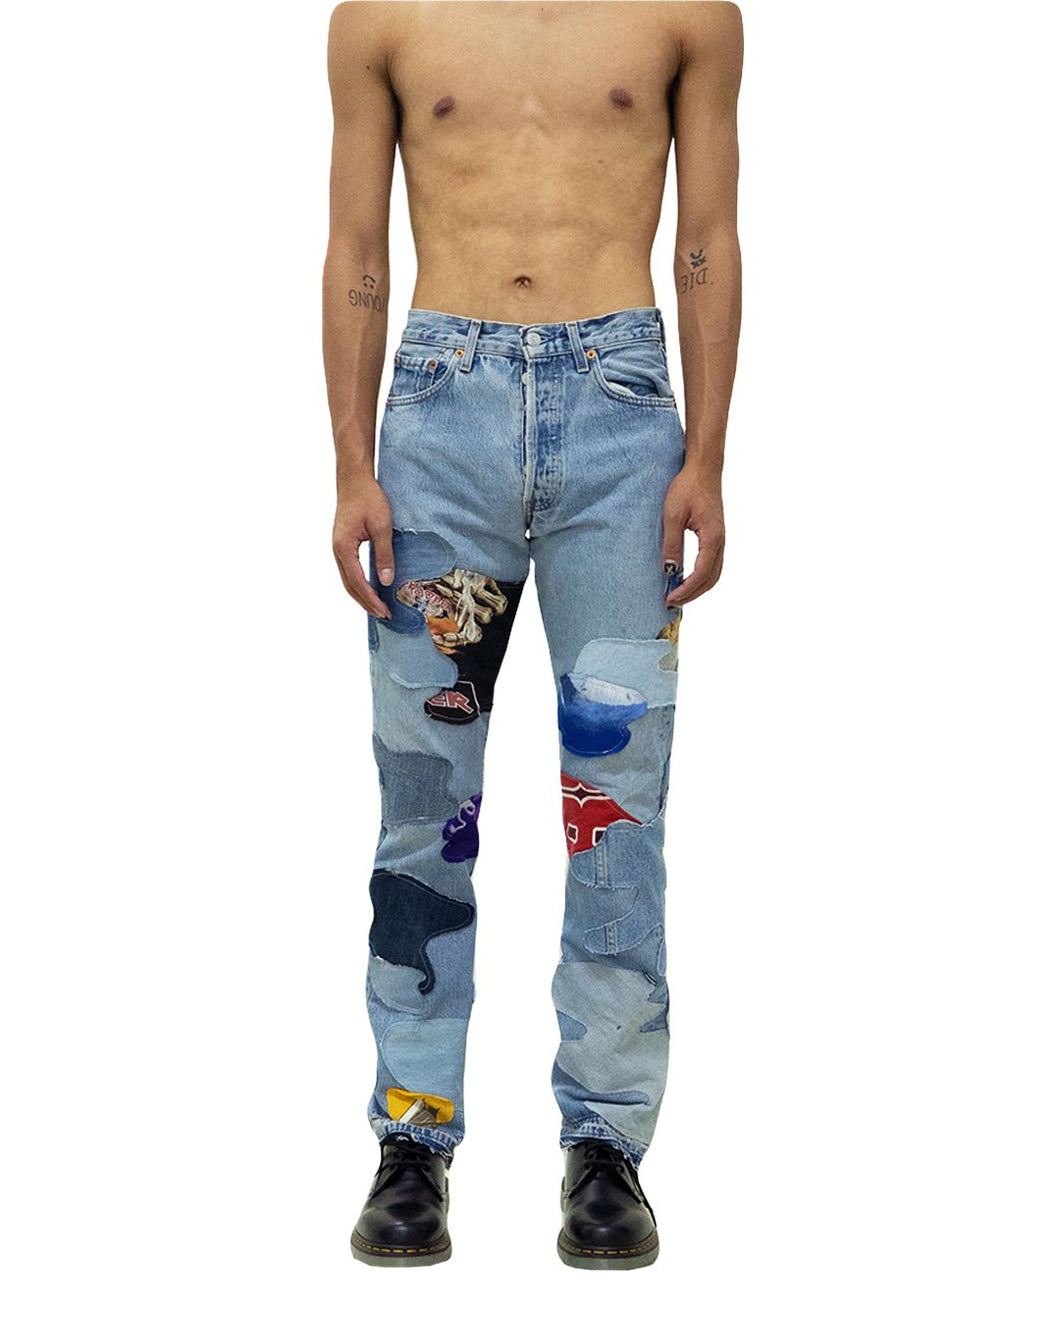 RANDOM EFFECT “Camouflage lovers” jeans